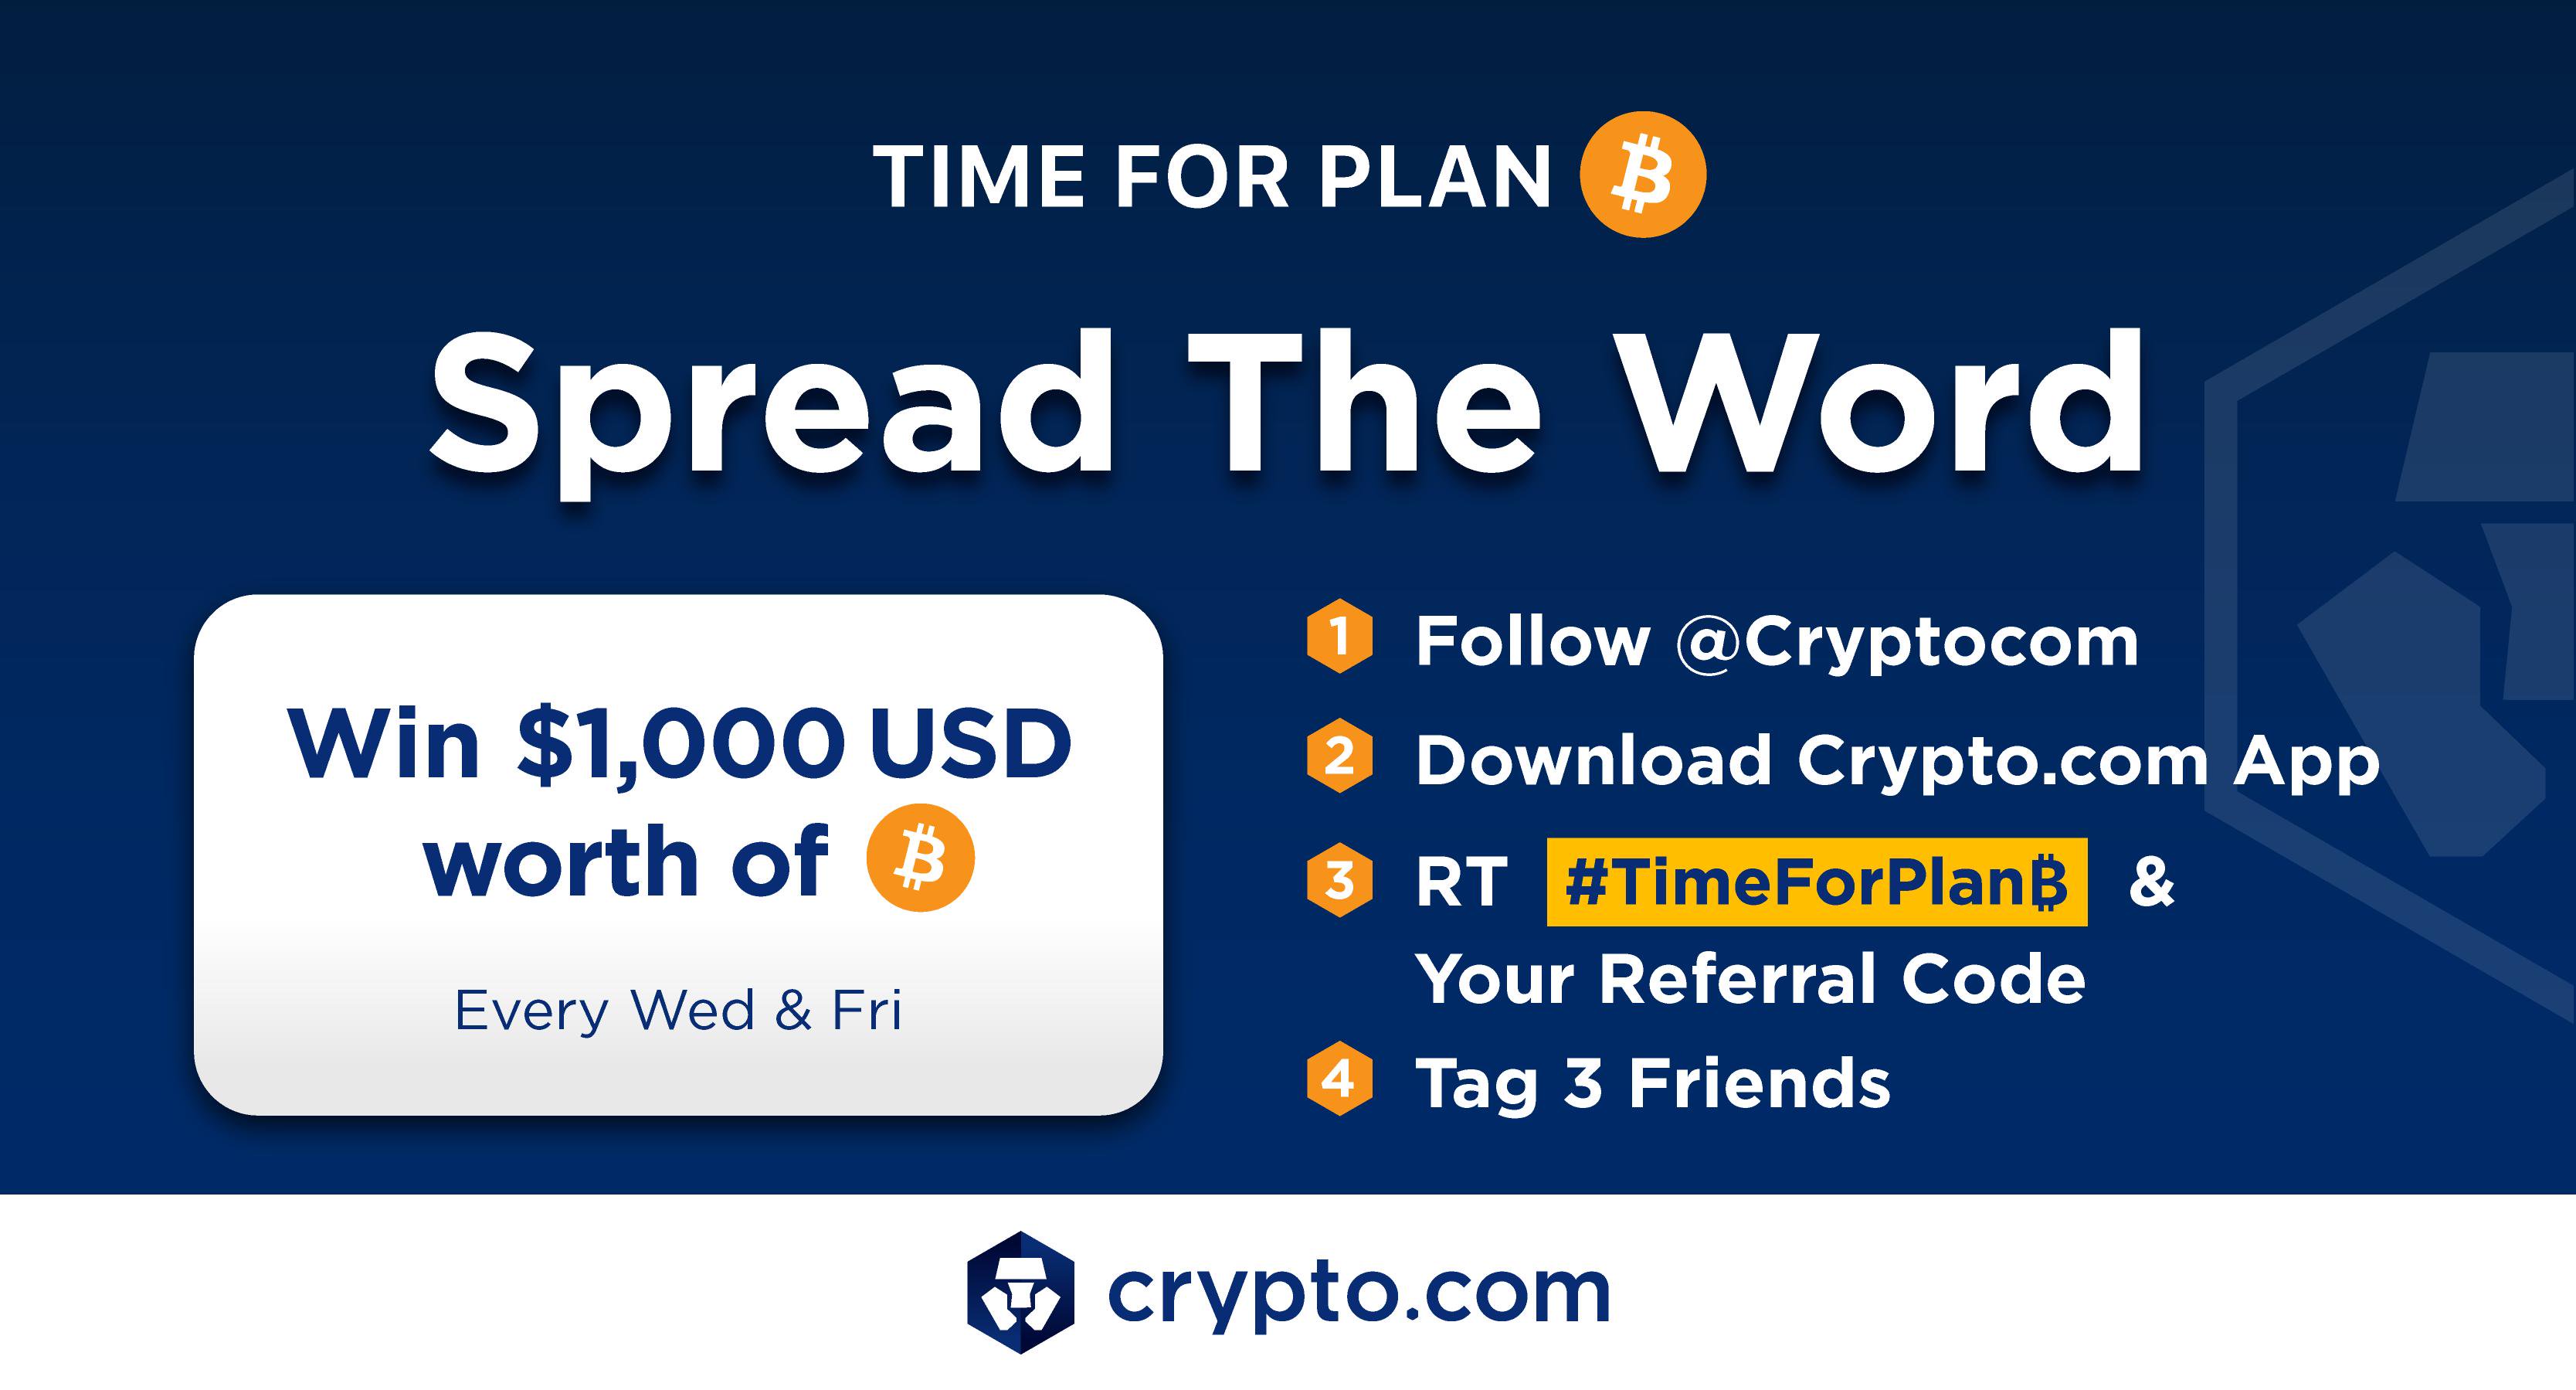 Win $1,000 USD worth of Bitcoin every Wed and Fri? Let's join Crypto.com latest celebration event to get a chance